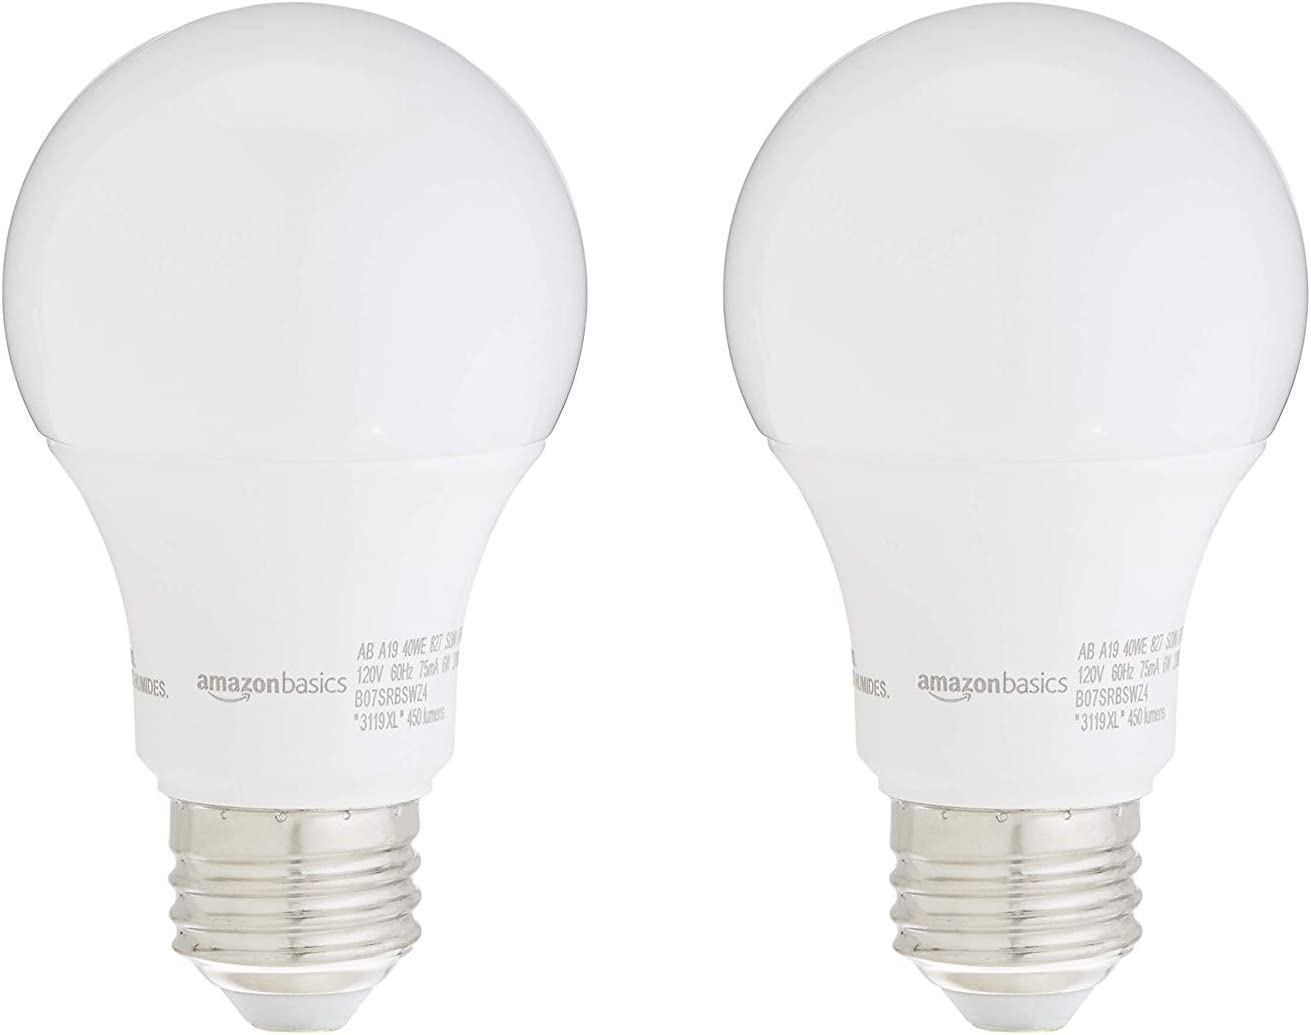 2-Pack Amazon Basics 40W Dimmable A19 LED Light Bulb (Soft White) $1.95 + Free Shipping w/ Prime or on $25+